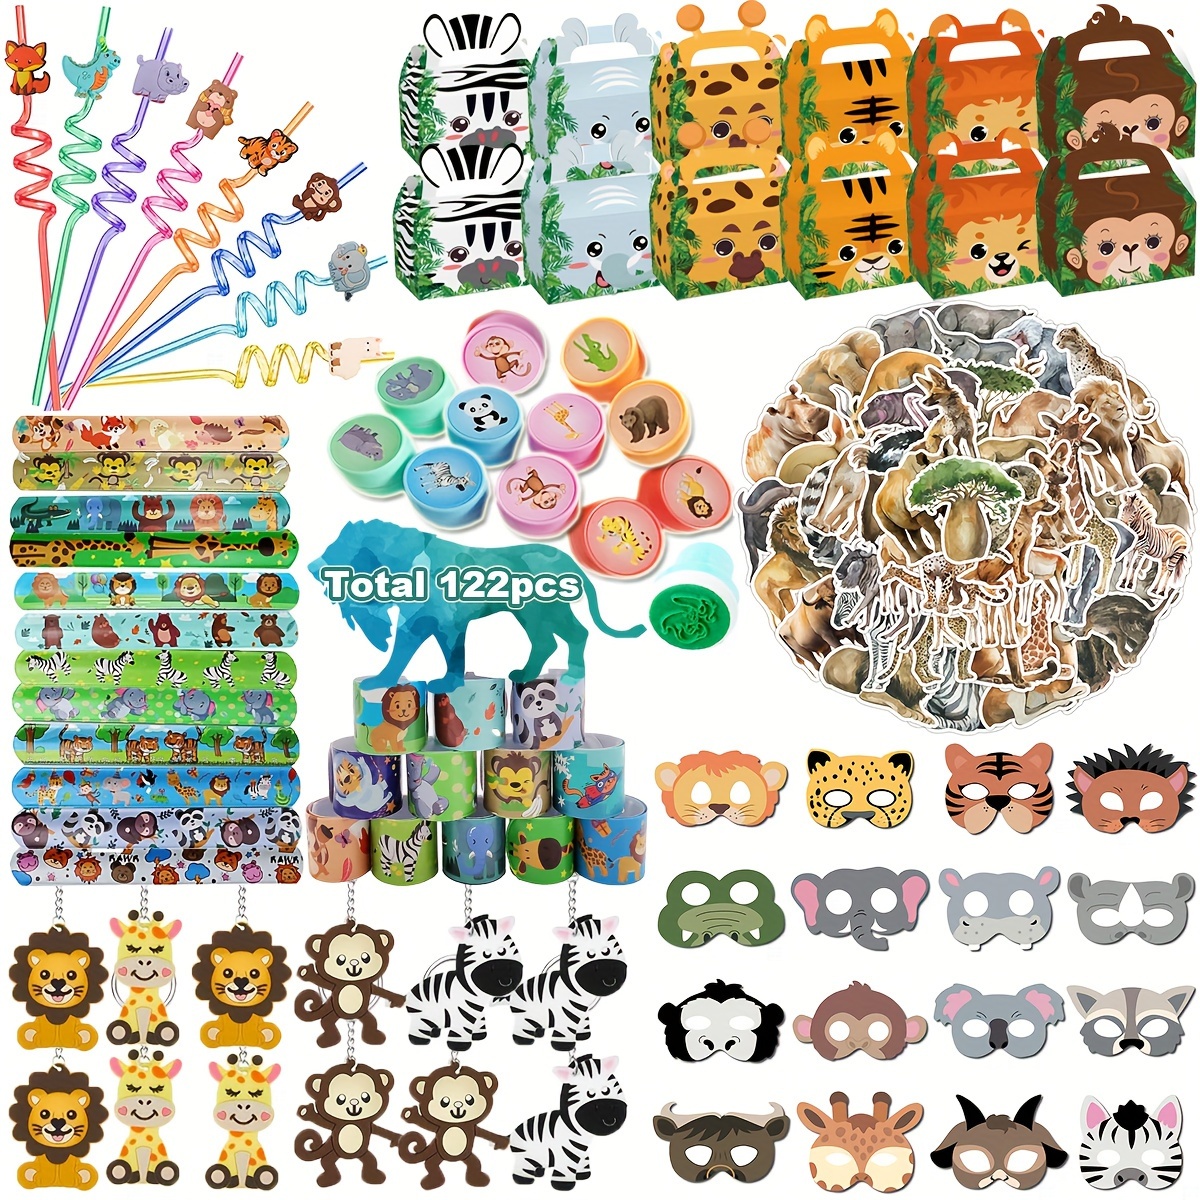 

122 Pcs, Jungle Animal Theme Party Supplies, Animal Theme Birthday Party Favor Bags, Party Celebration Favor Bags, School Classroom Student Prizes, Birthday Treat Gifts